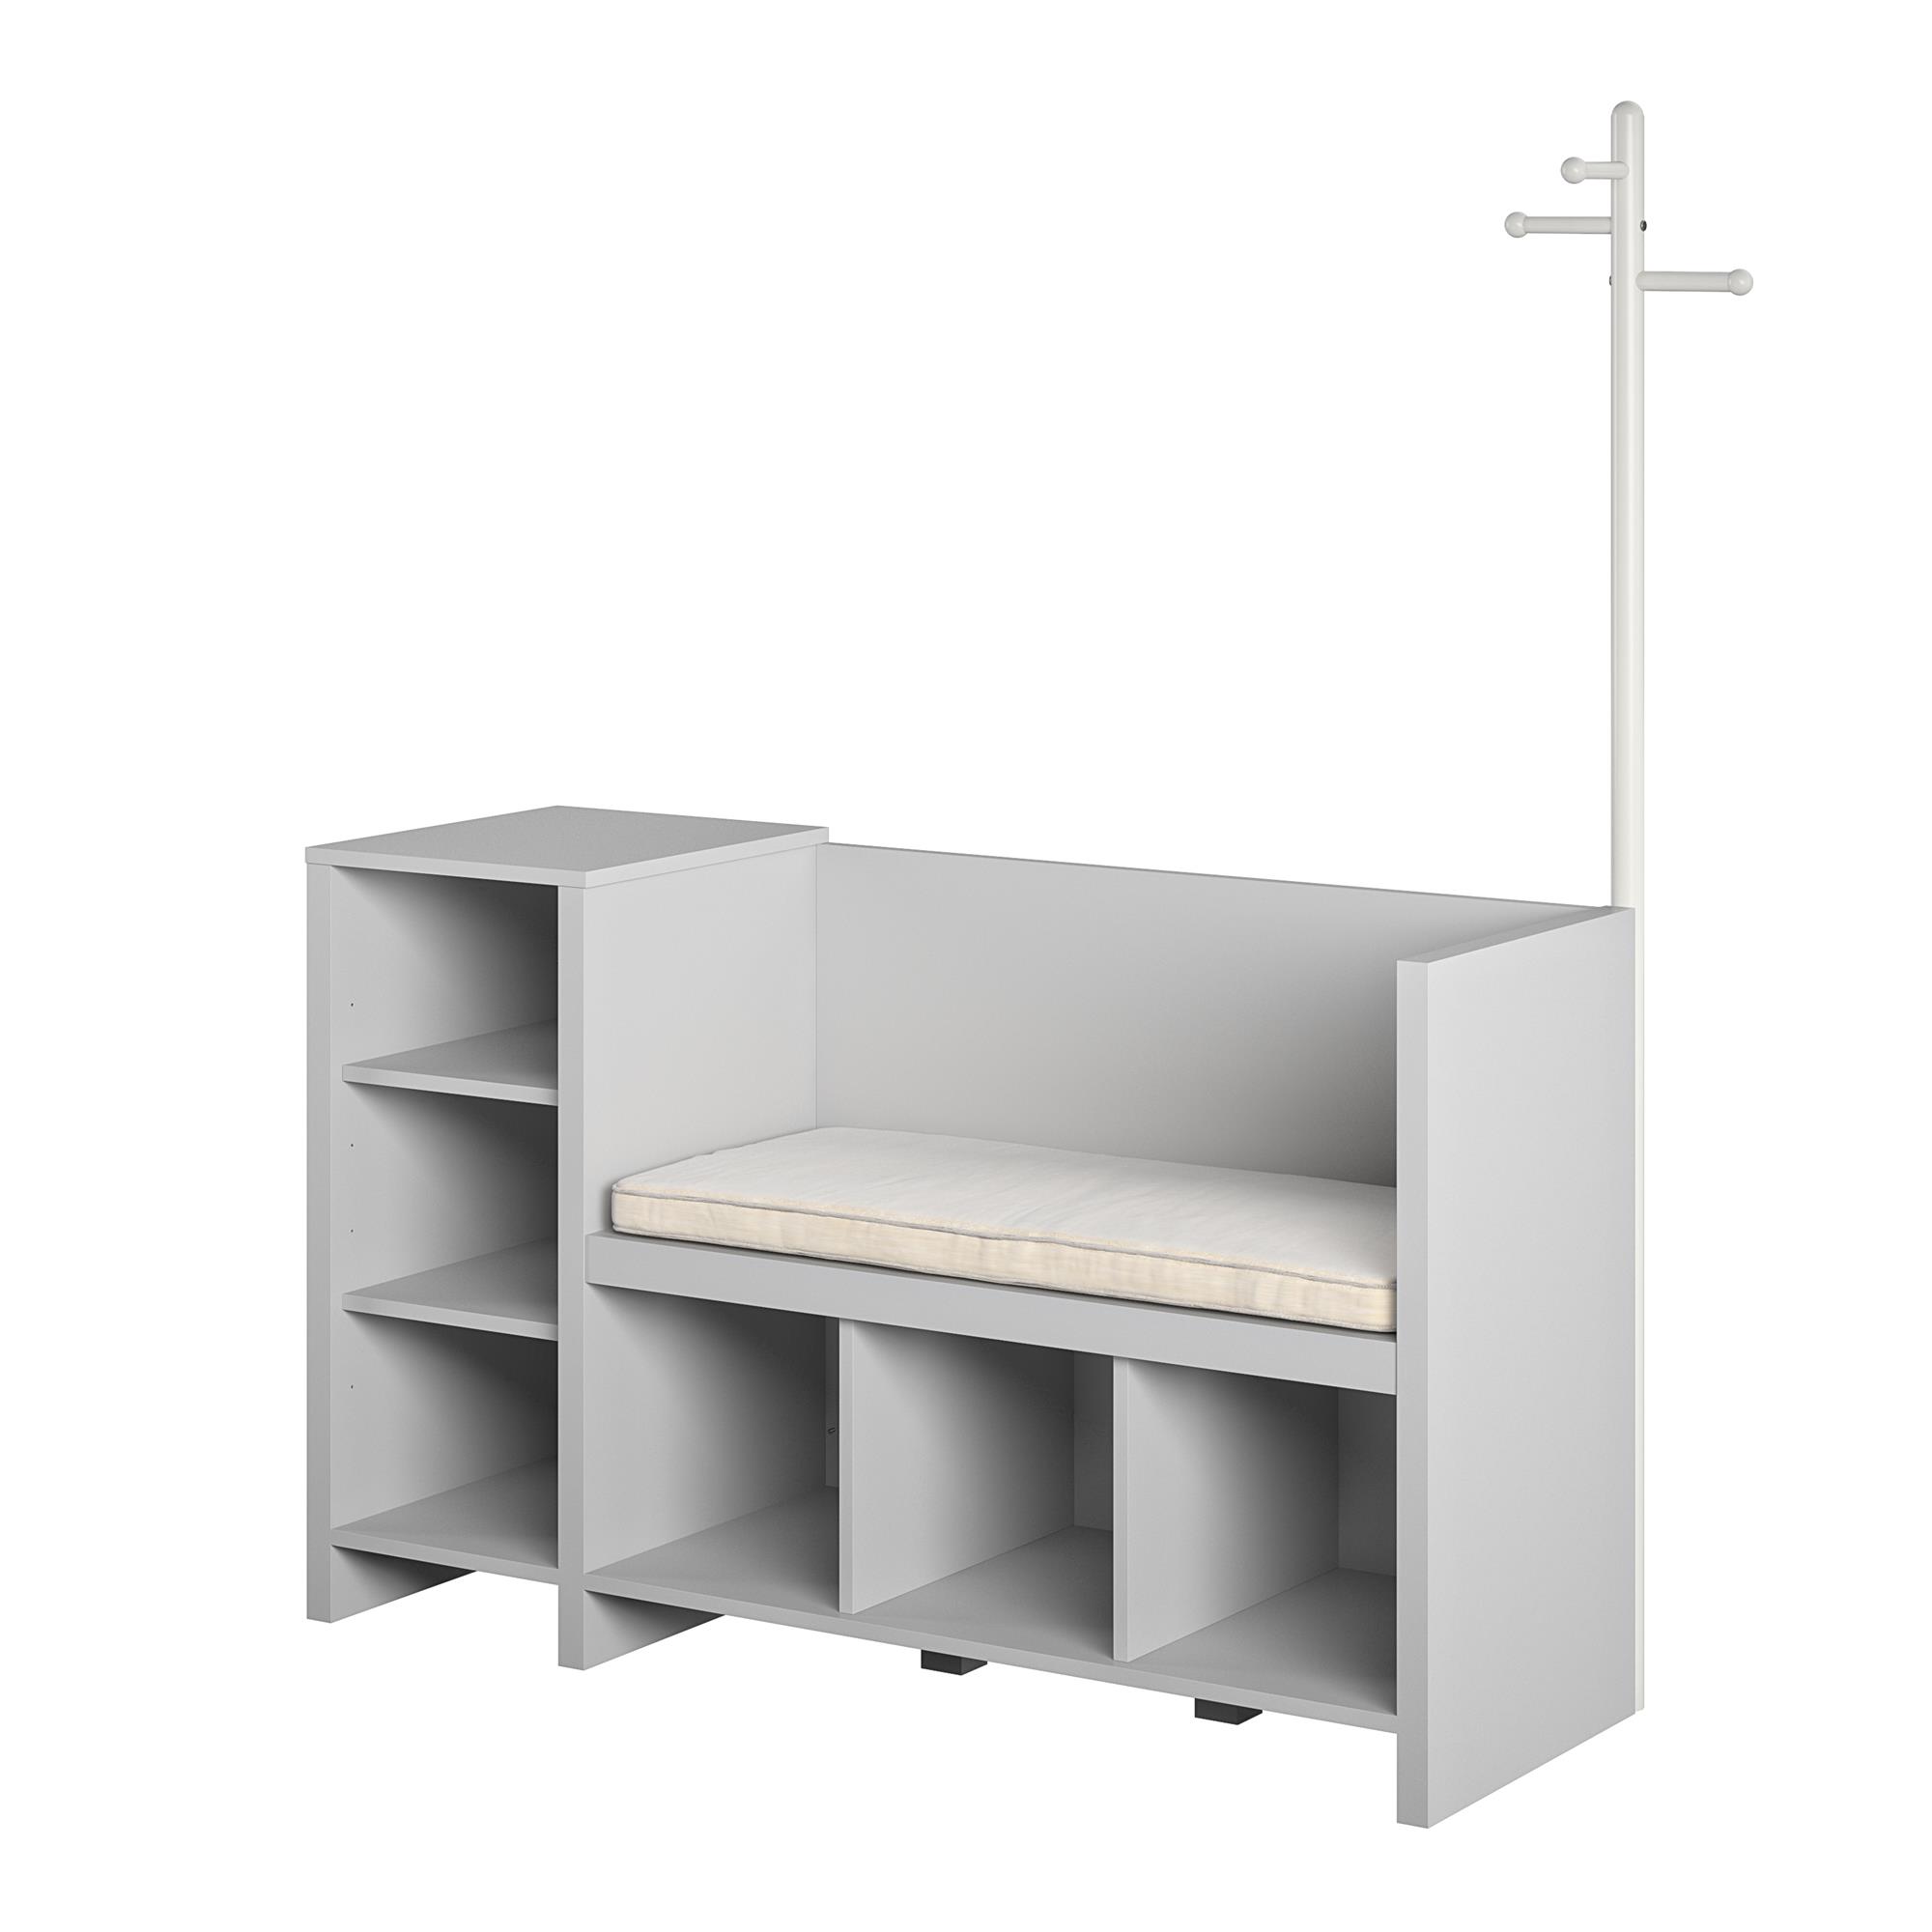 Ameriwood Home Charli Storage Bench and Coat Rack, Dove Gray - image 4 of 12